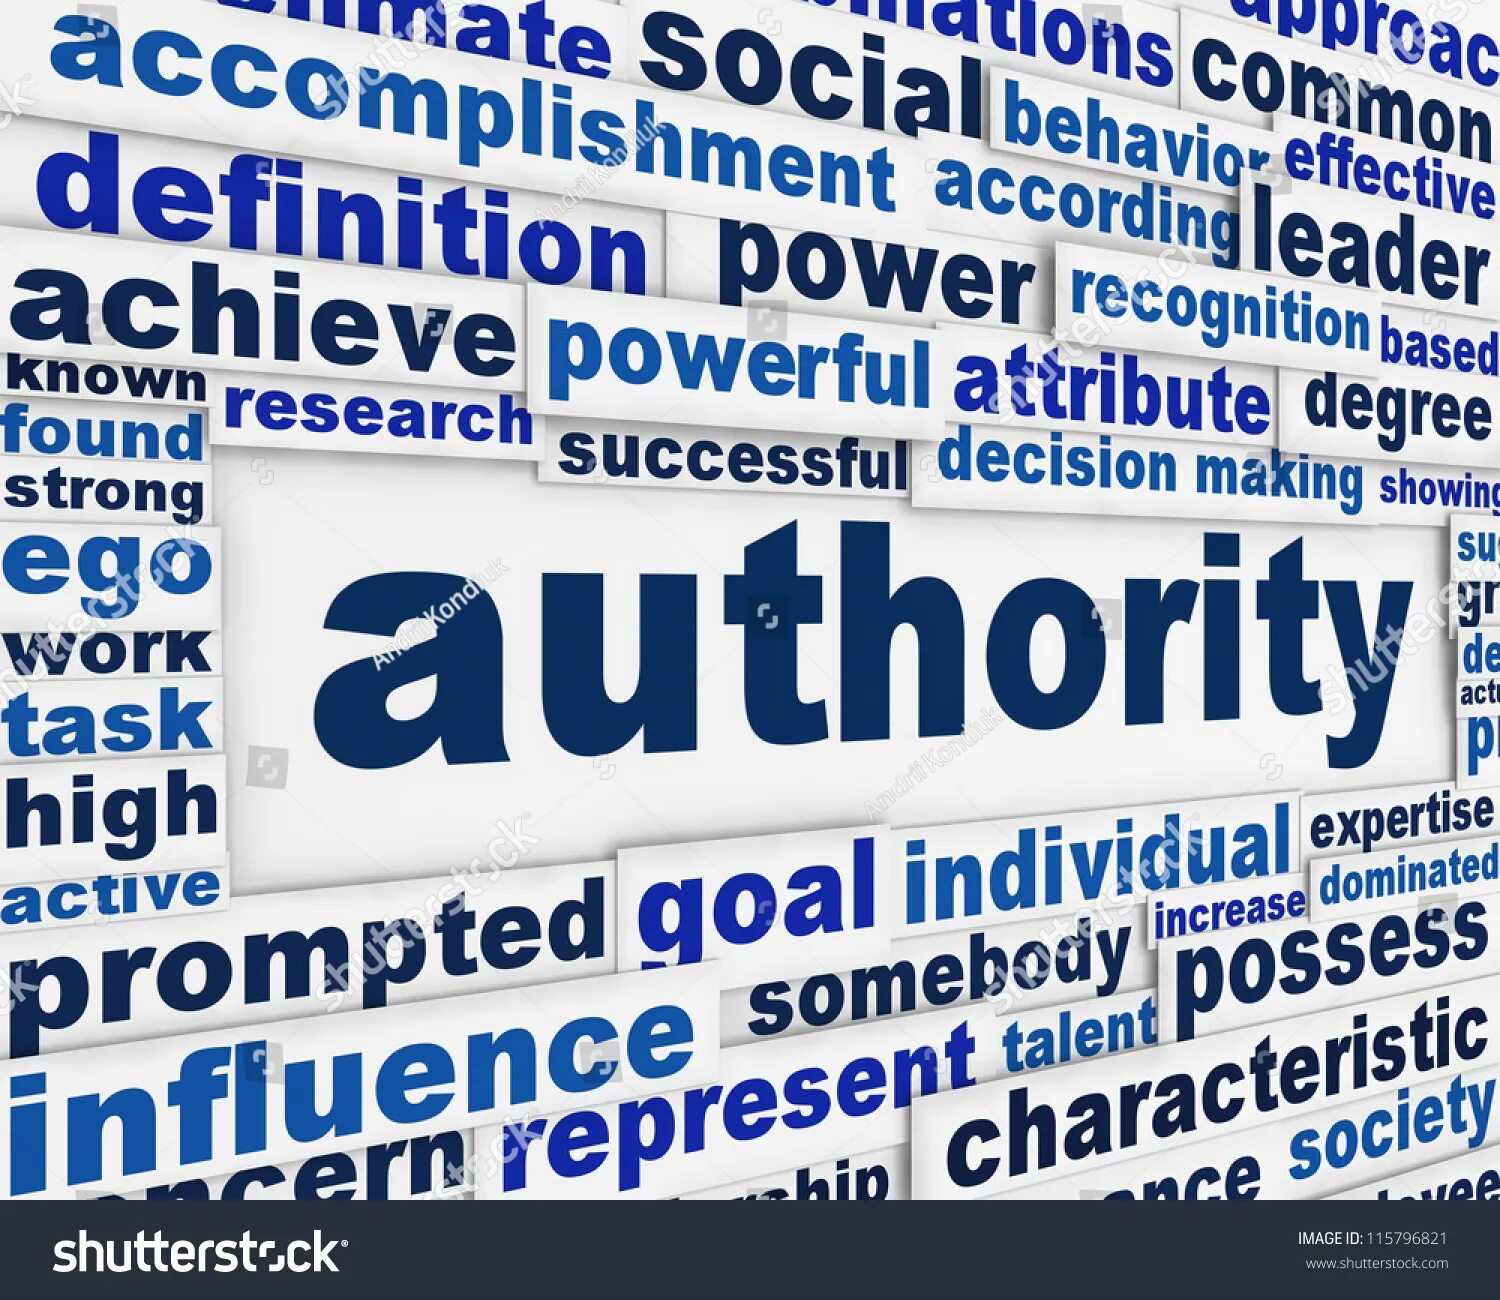 Authority message. Authority. Authority and Power. Achieve Definition. Authorities.